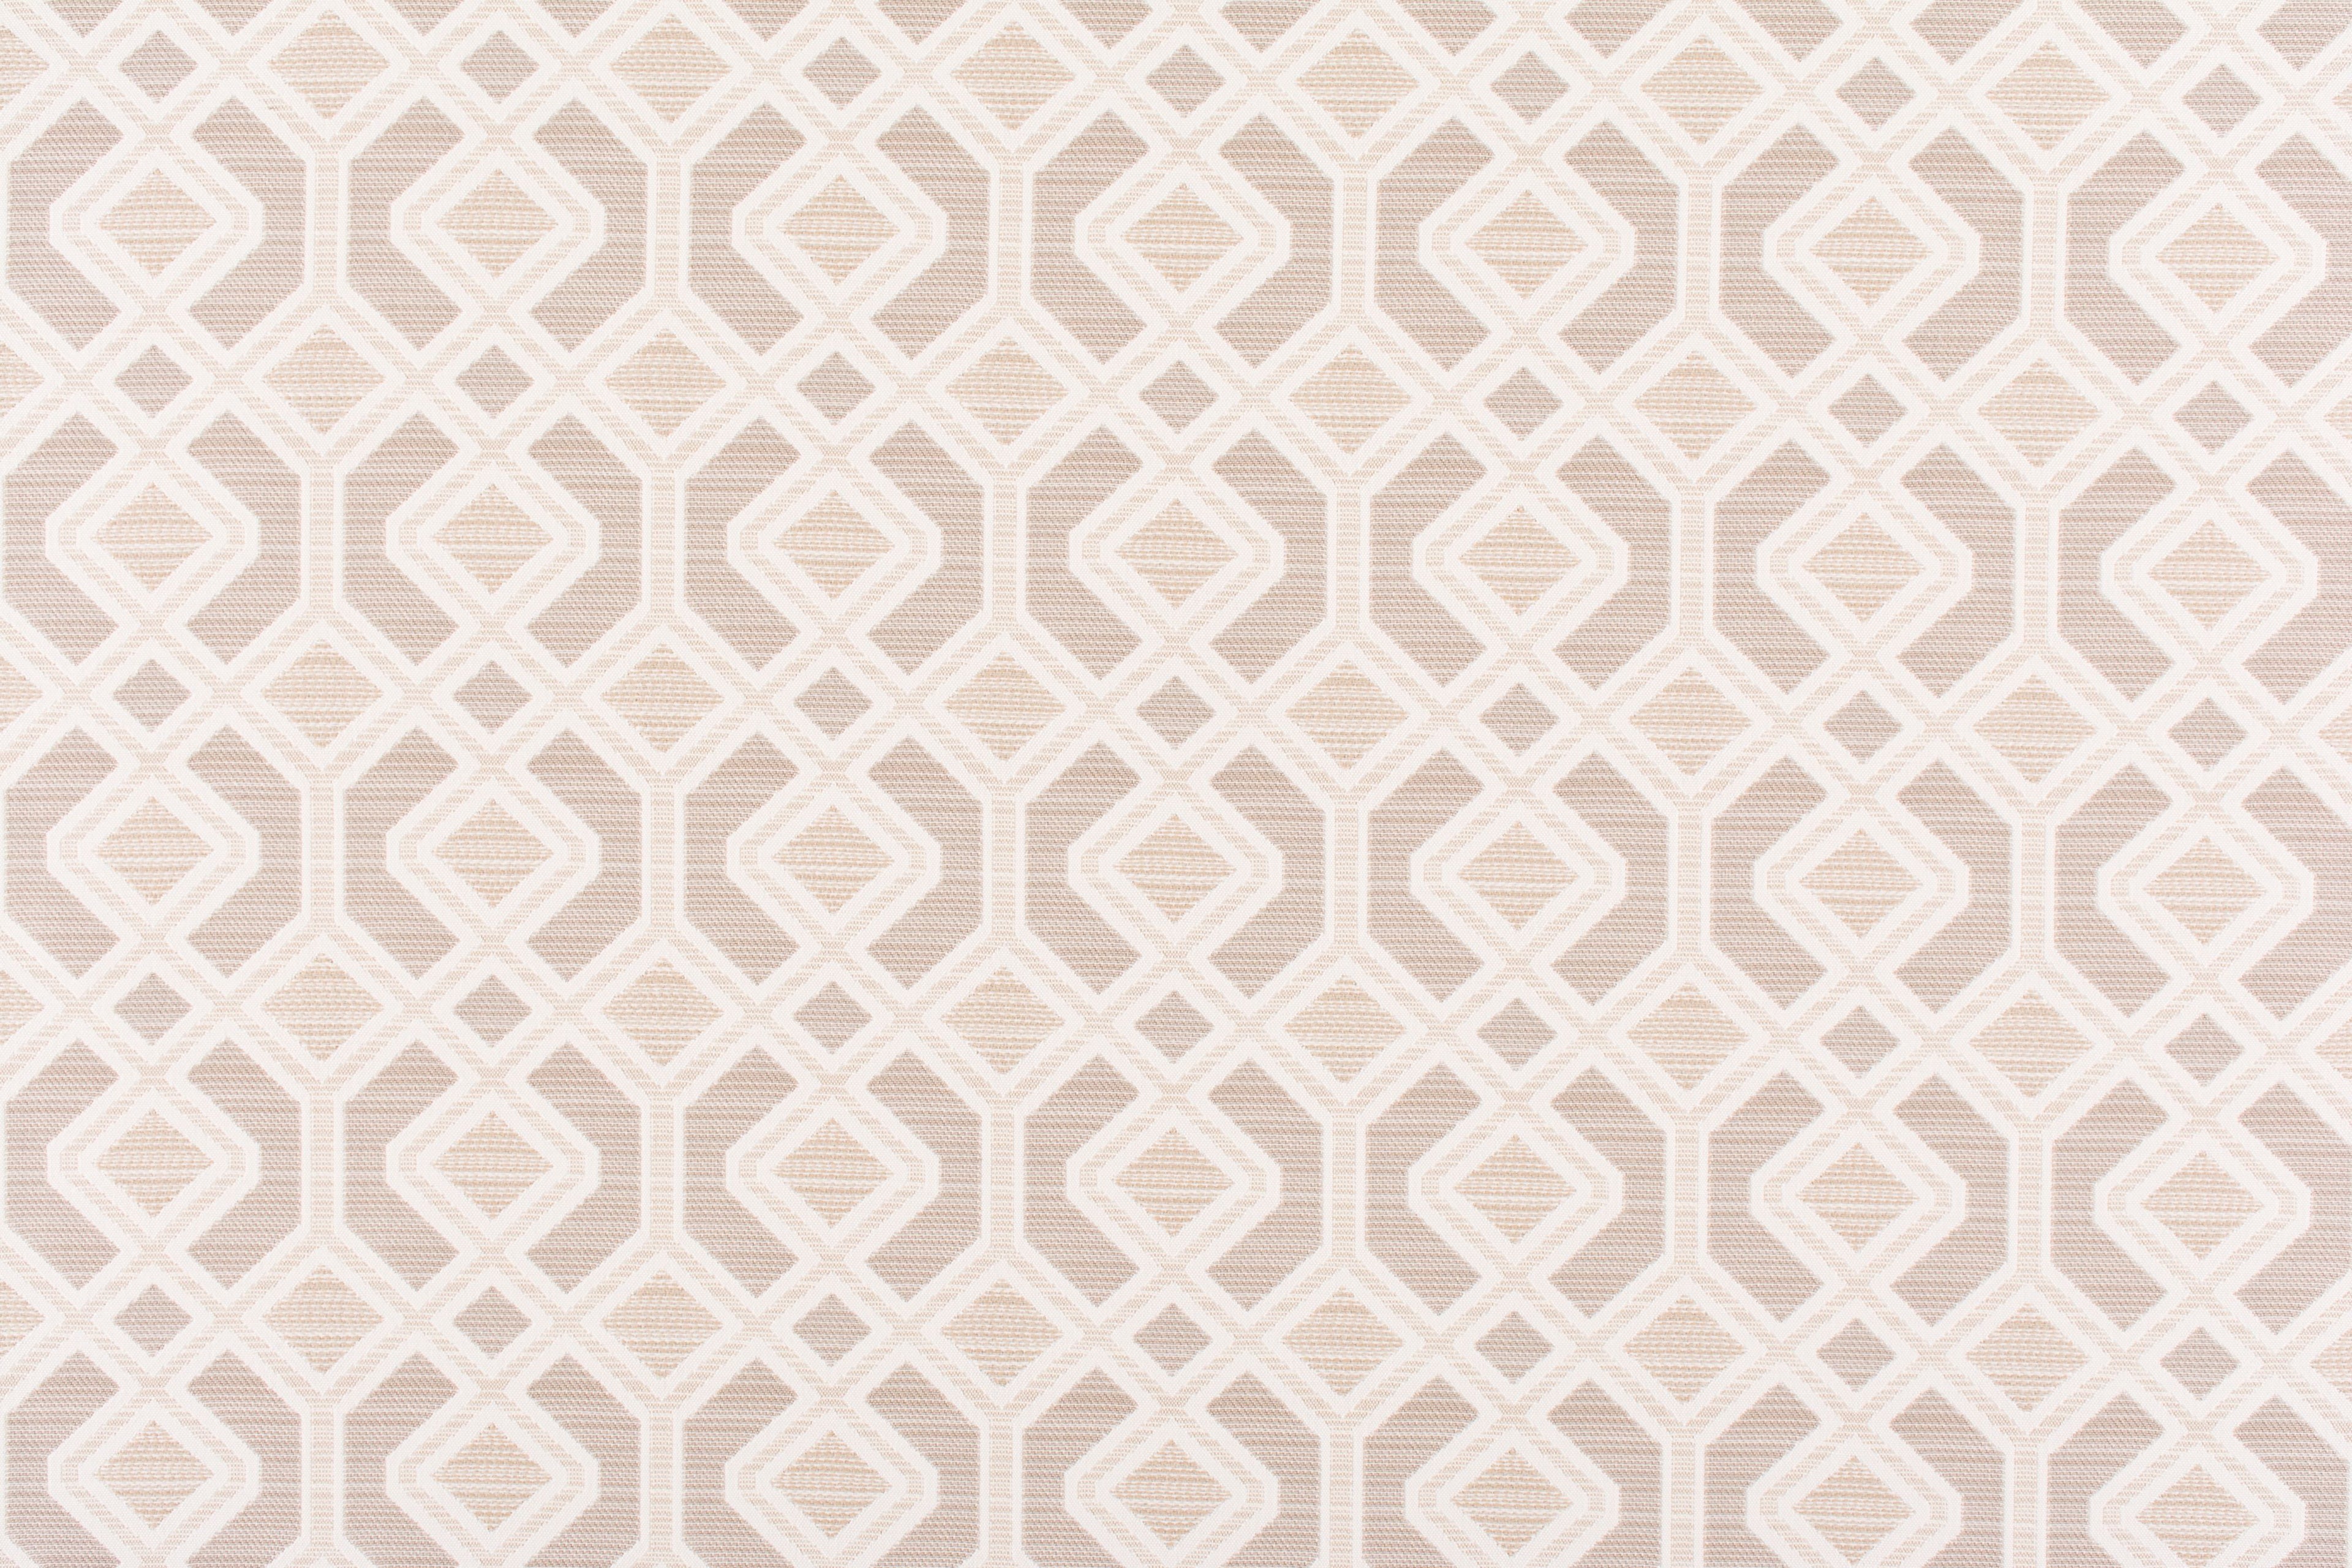 Oak Bluff fabric in dune color - pattern number WR 00052995 - by Scalamandre in the Old World Weavers collection